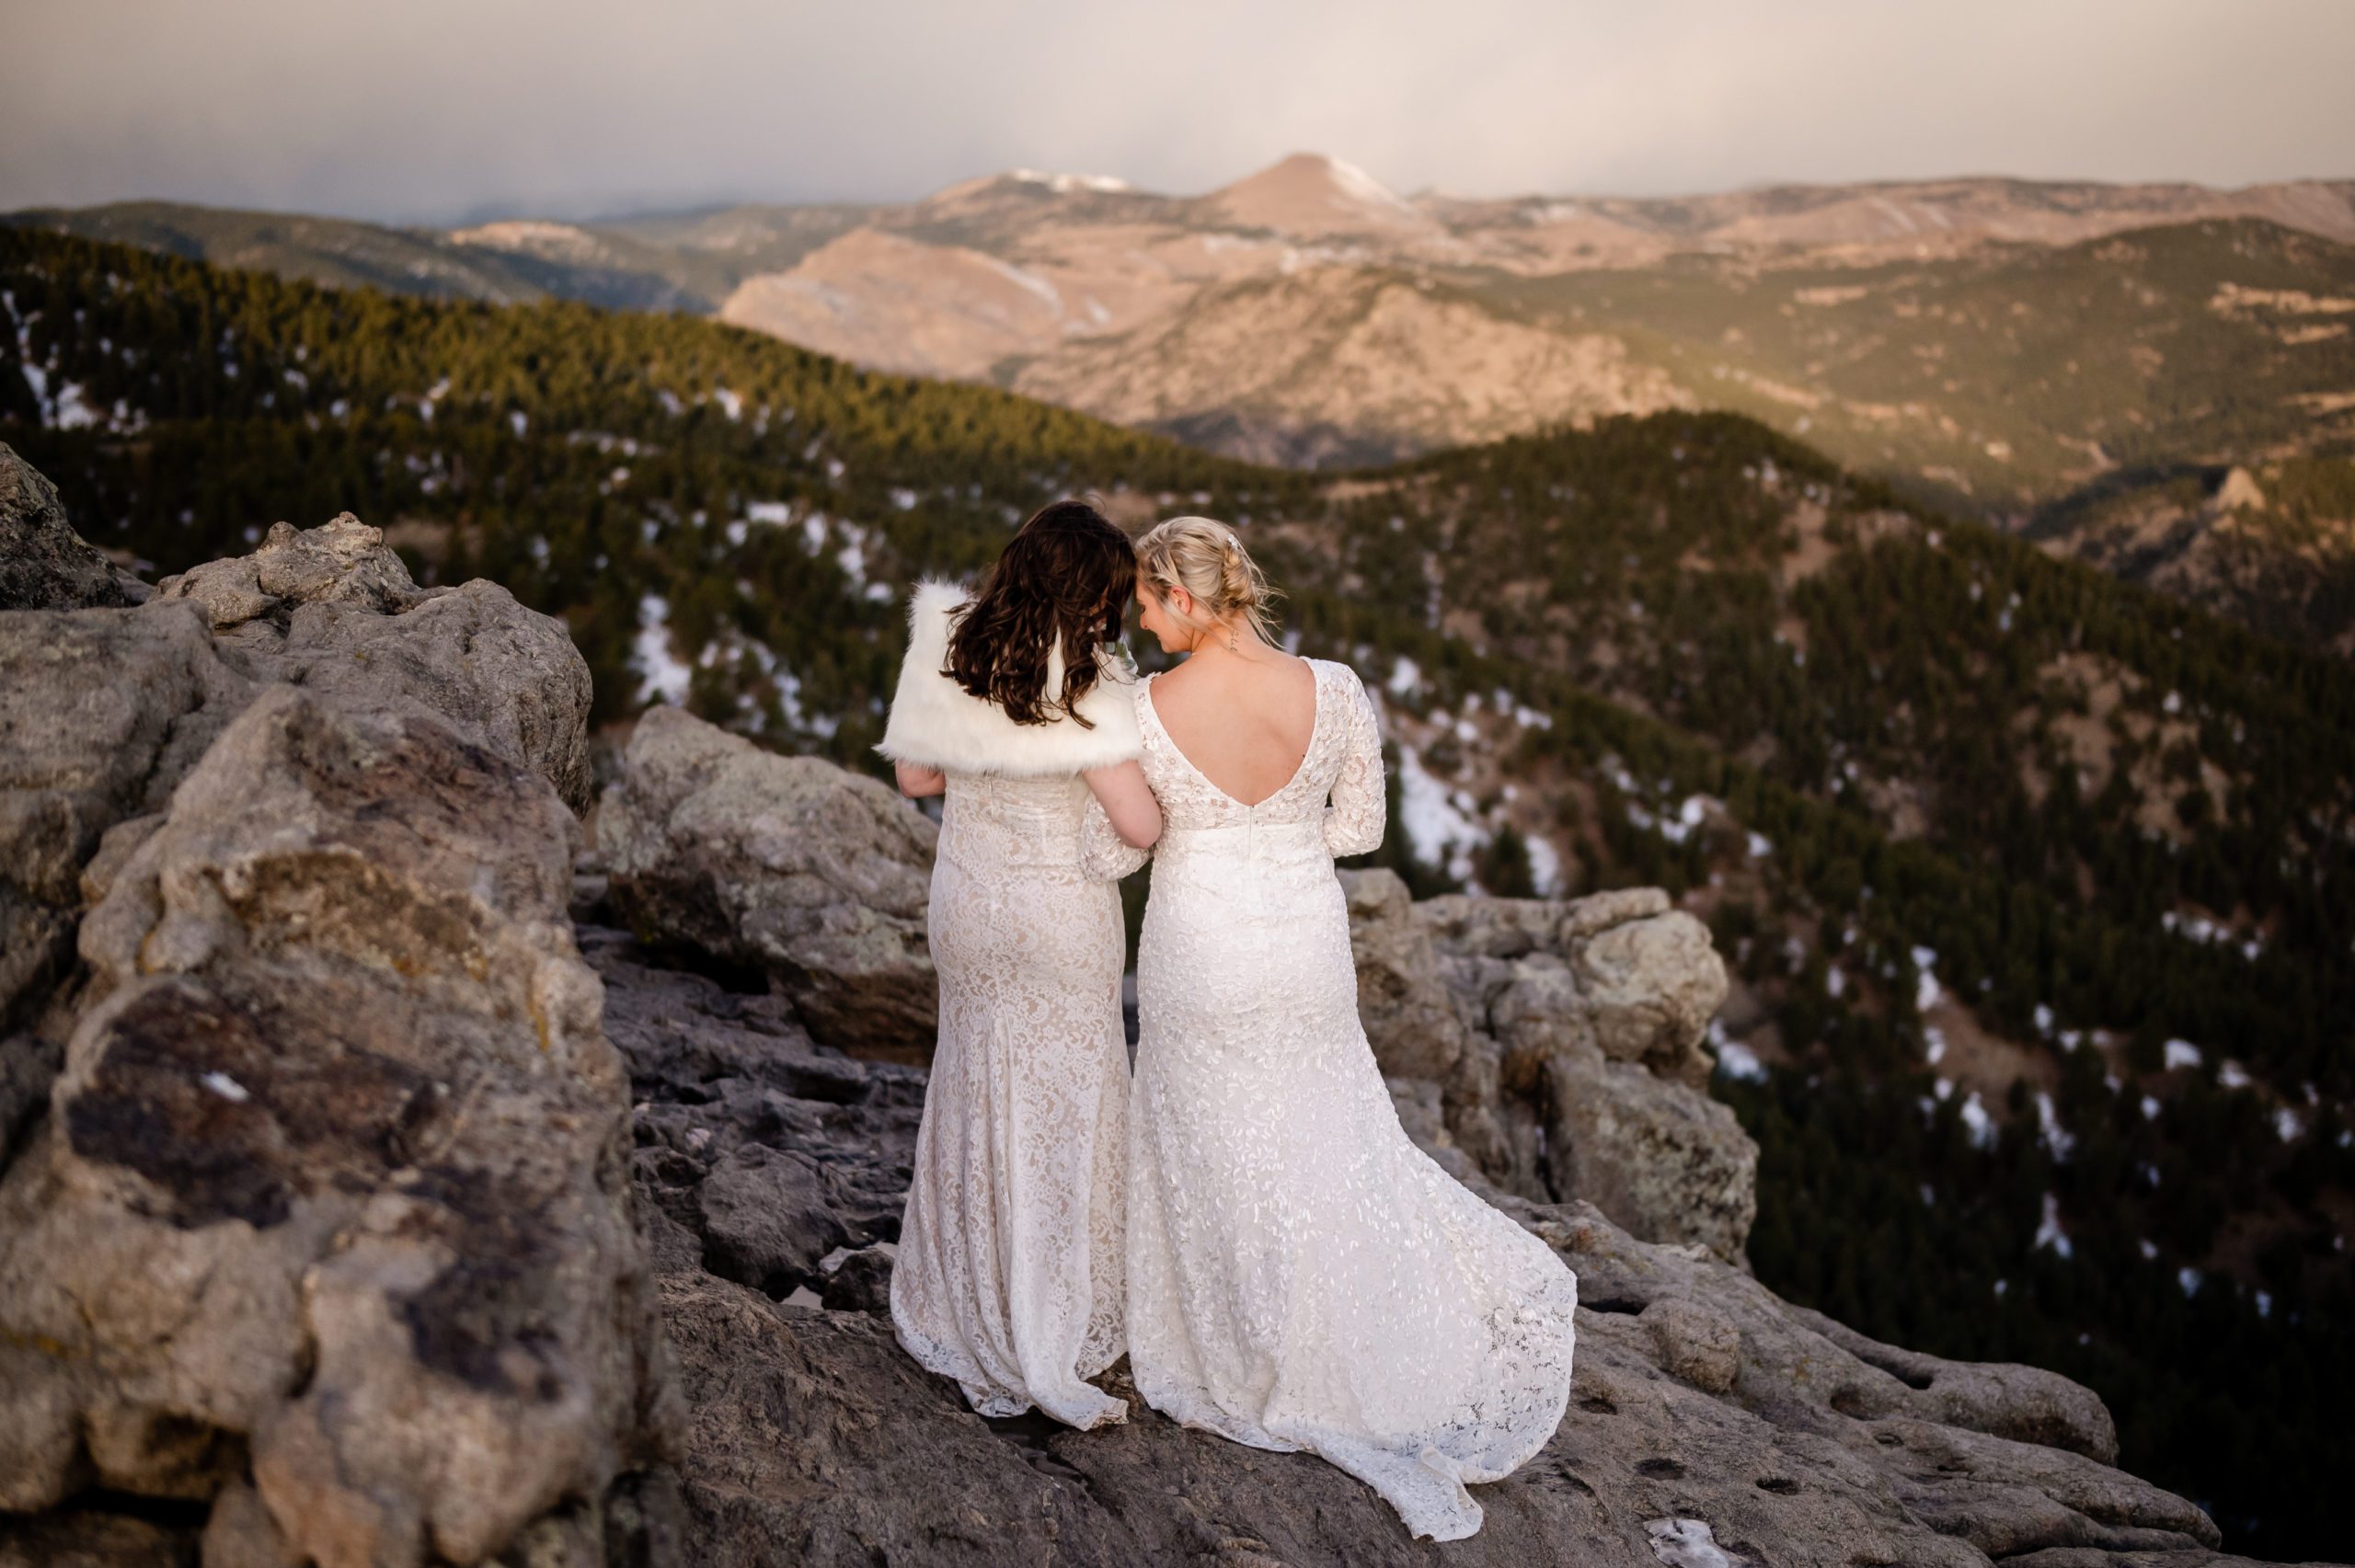 The brides facing the sunset, after their Lost Gulch elopement ceremony.